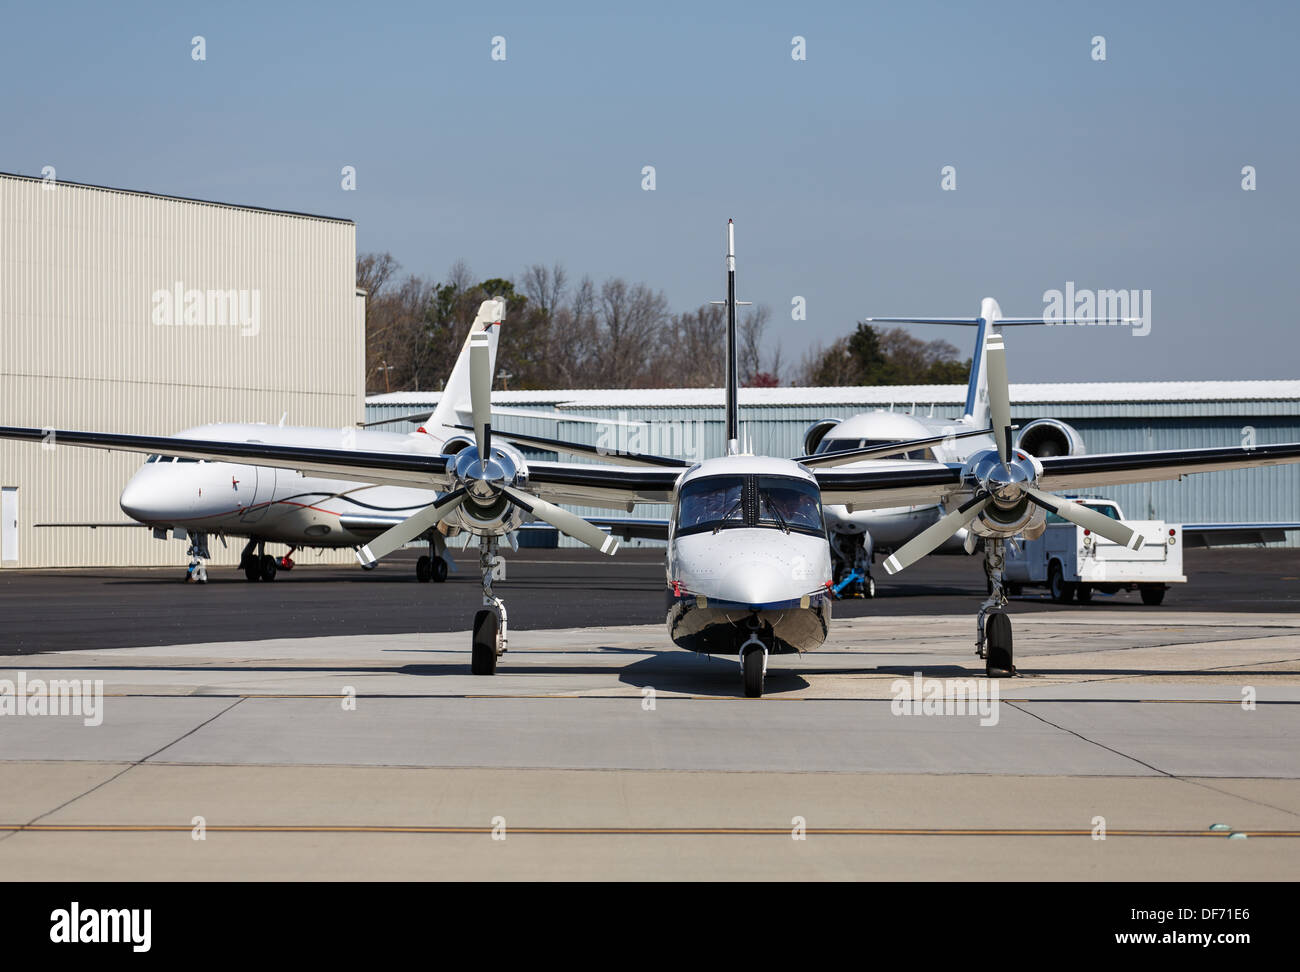 A large private turbo-prop airplane by hangers and private jets Stock Photo